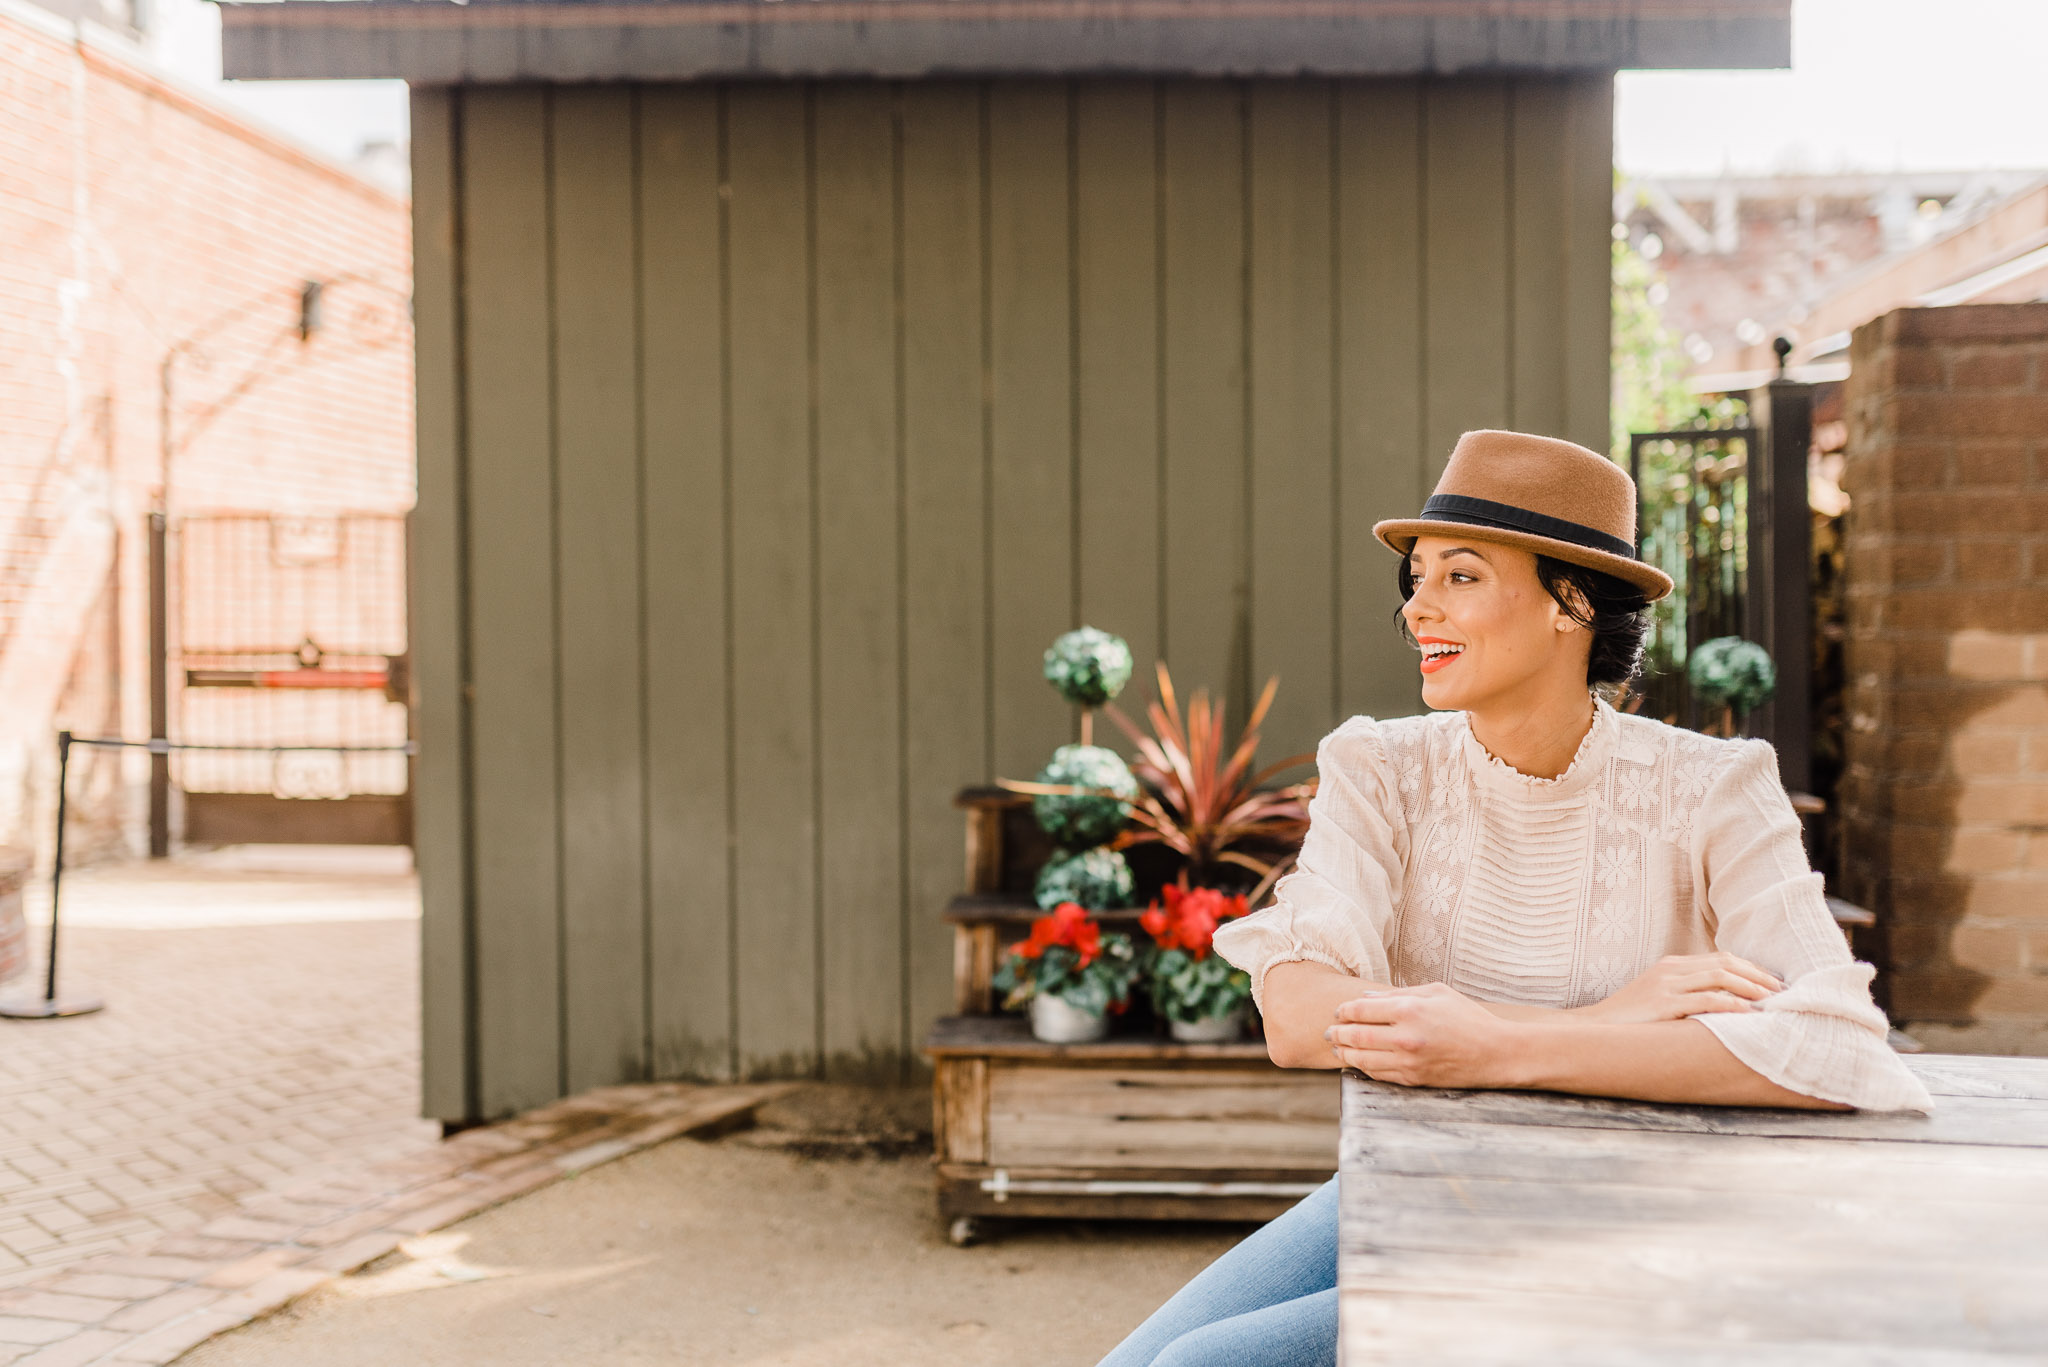 Woman wearing a hat sitting on a picnic bench outside. She's looking away from the camera.